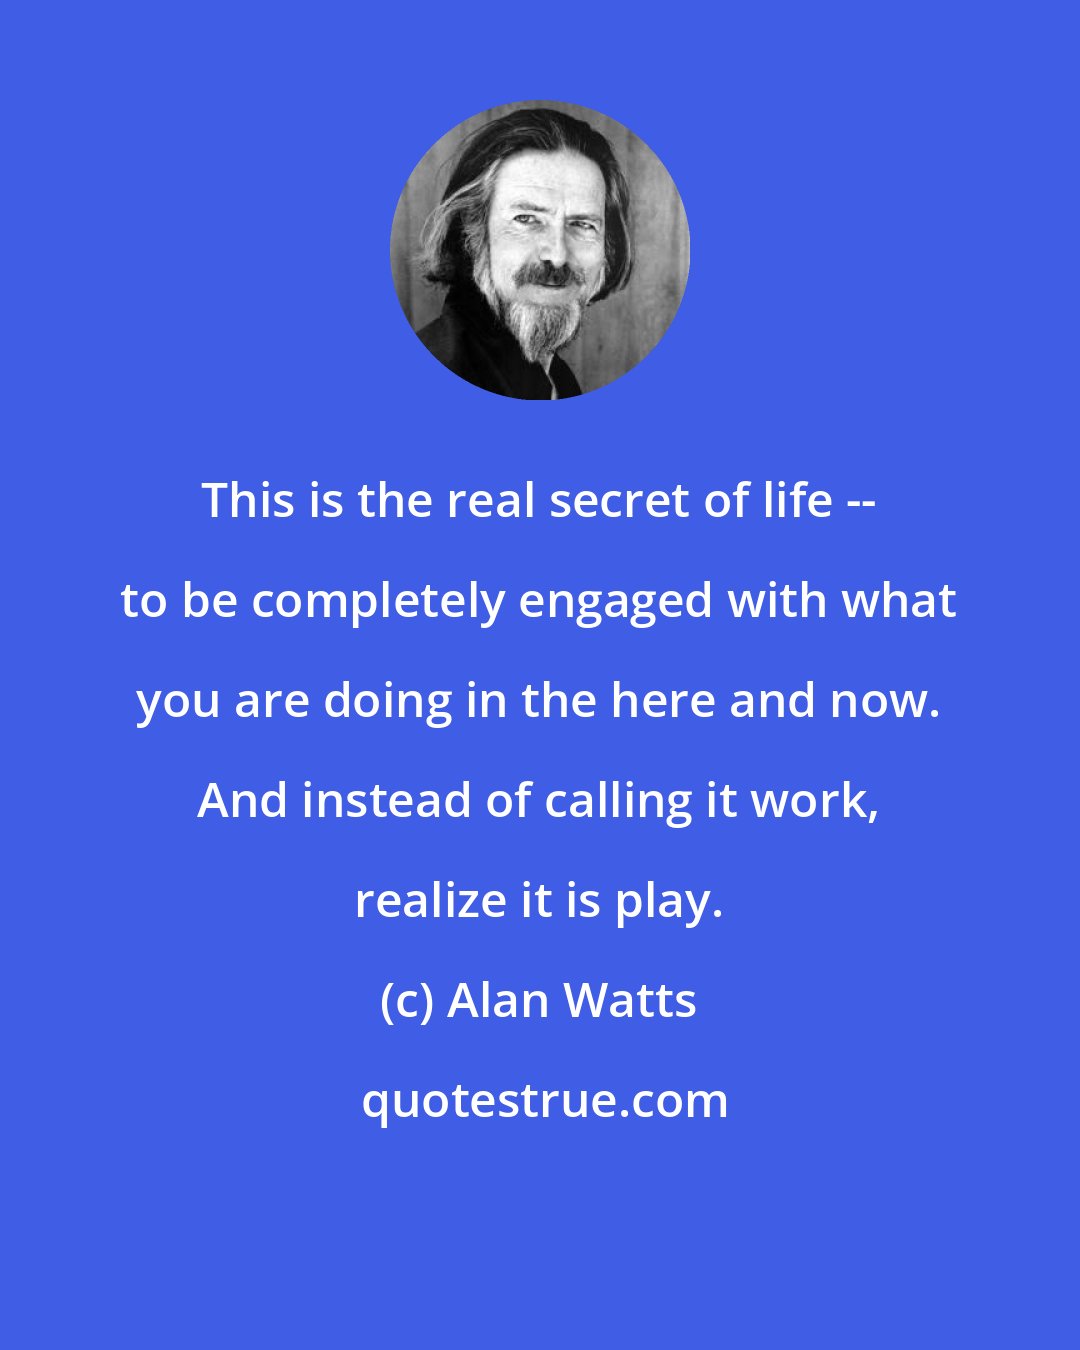 Alan Watts: This is the real secret of life -- to be completely engaged with what you are doing in the here and now. And instead of calling it work, realize it is play.